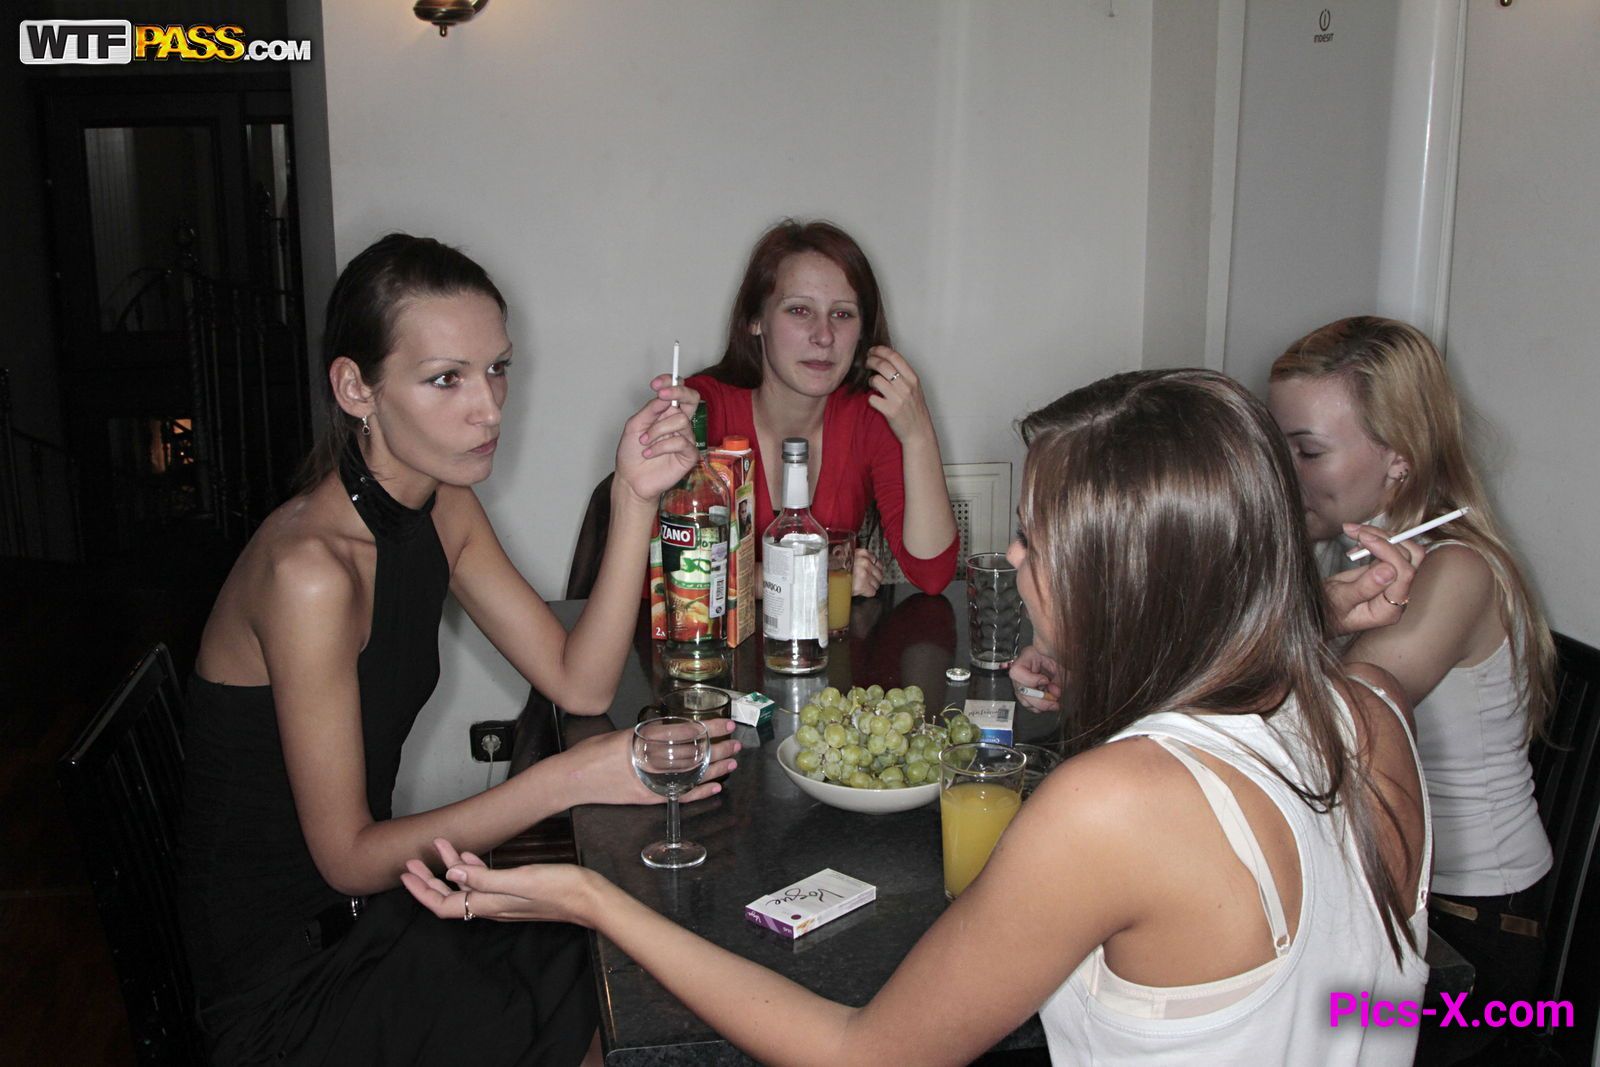 Real college sex on weekend, part 6 - College Fuck Parties - Image 1